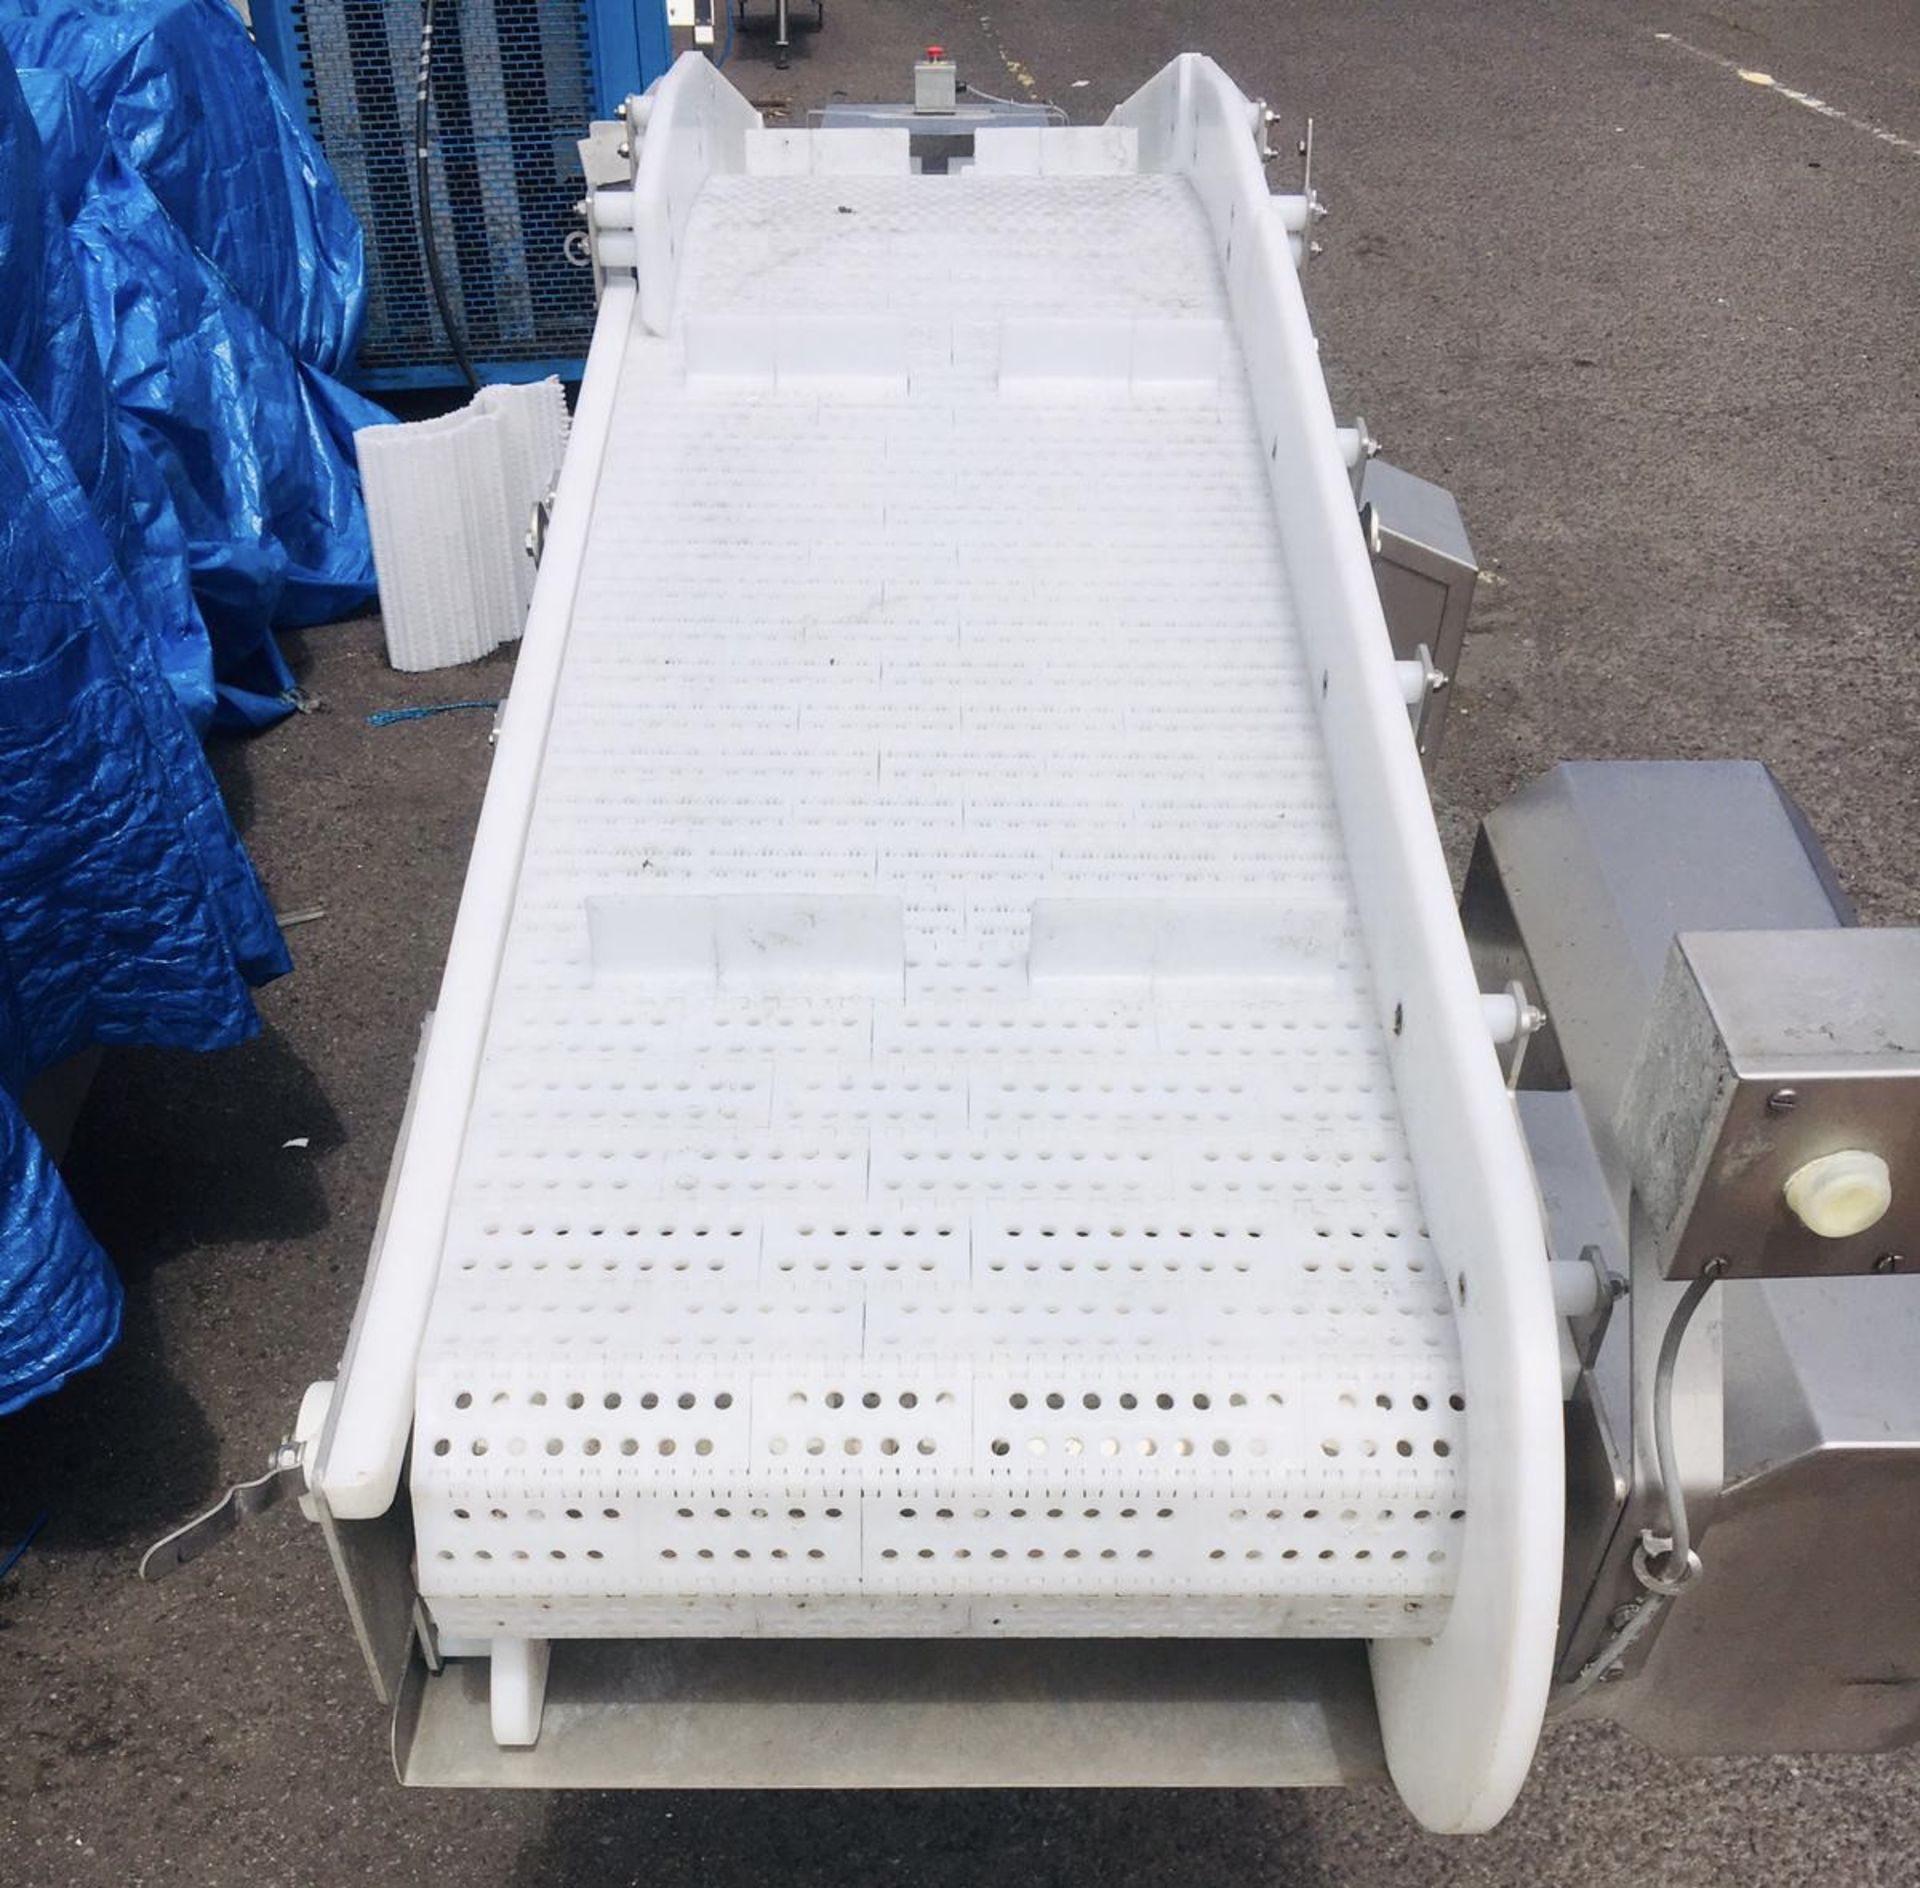 SF stainless steel mobile powered Conveyor, 5600mm - Image 5 of 7